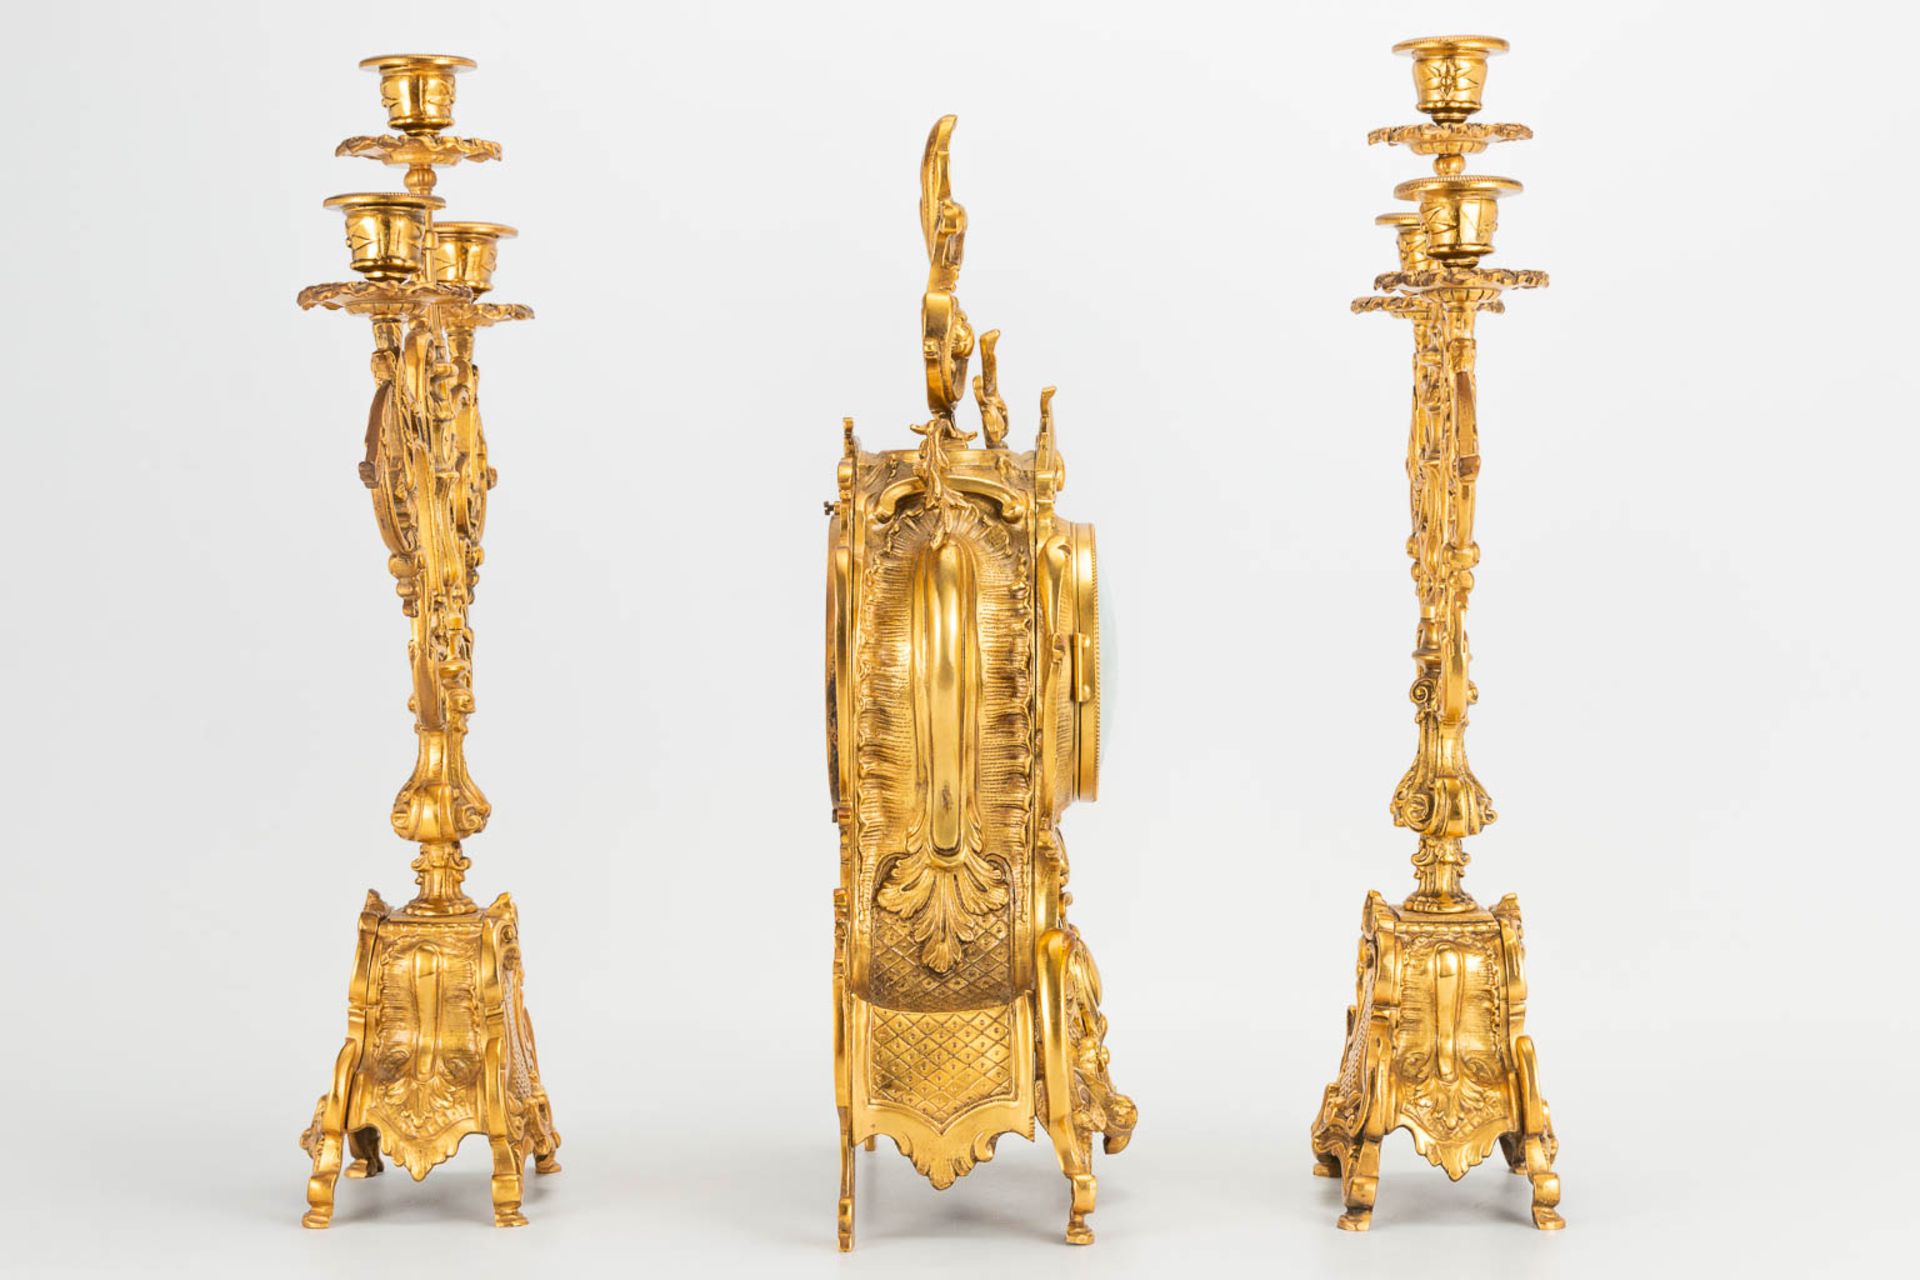 A 3 piece garniture clockset made of bronze, consisting of a clock and 2 candelabra. (9 x 22 x 41 cm - Image 4 of 17